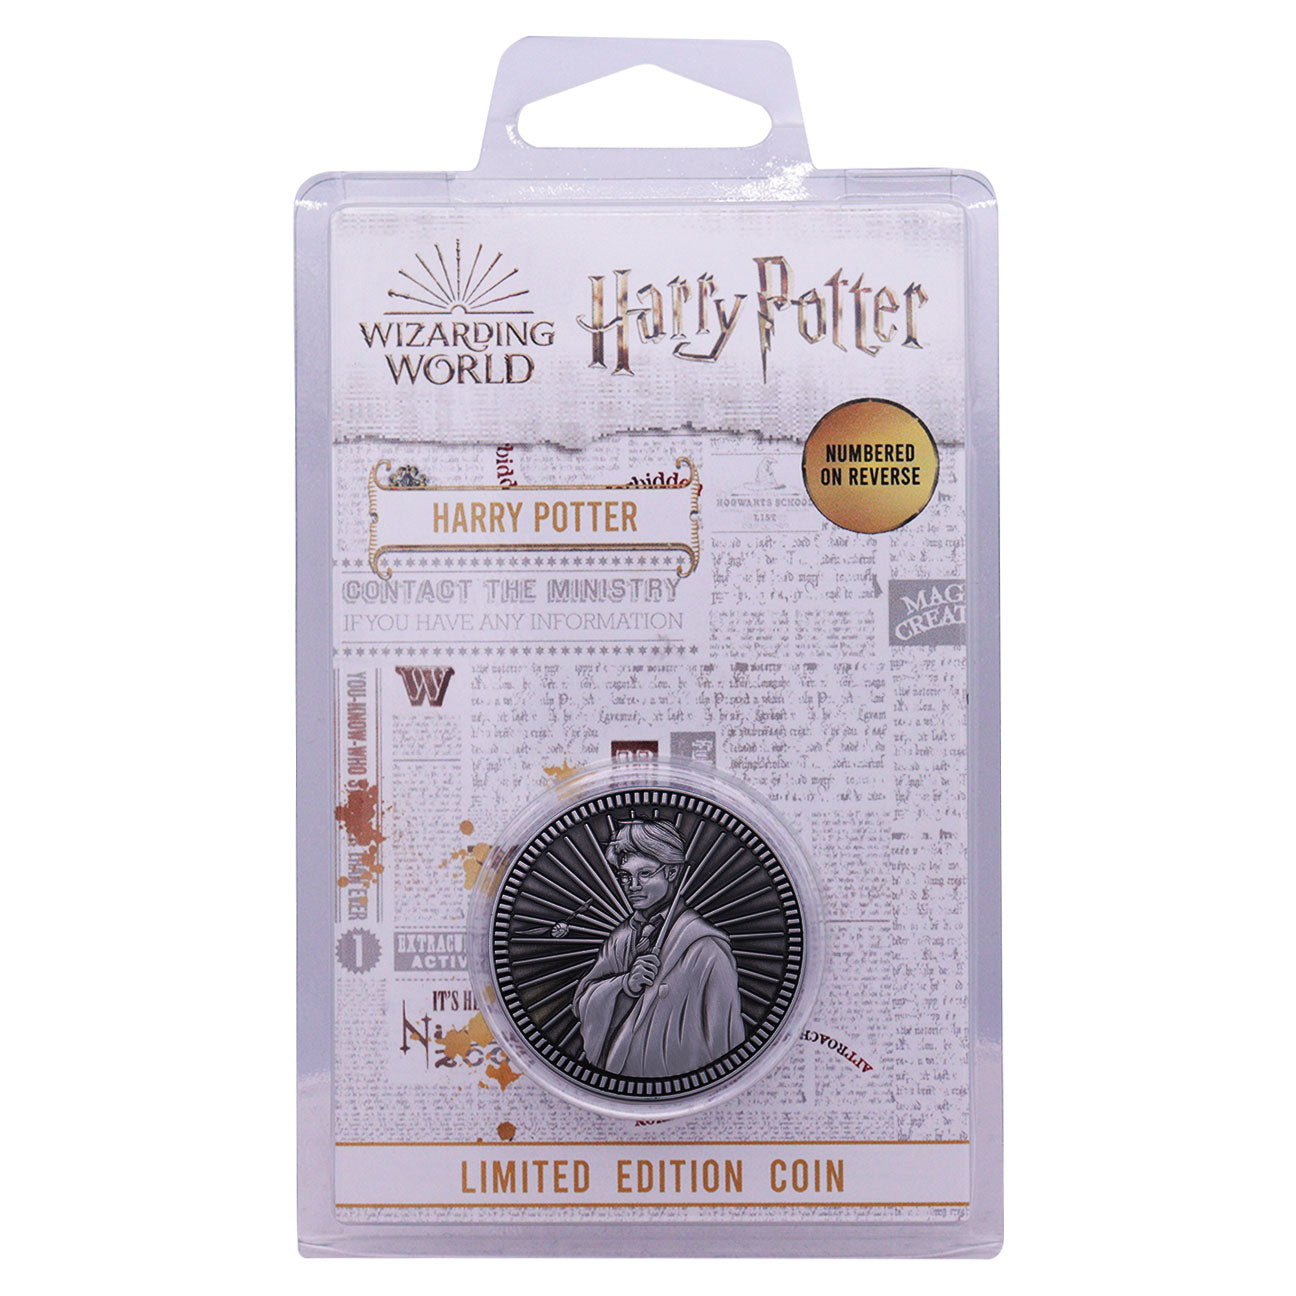 Harry Potter Limited Edition Harry Potter Collectible Coin